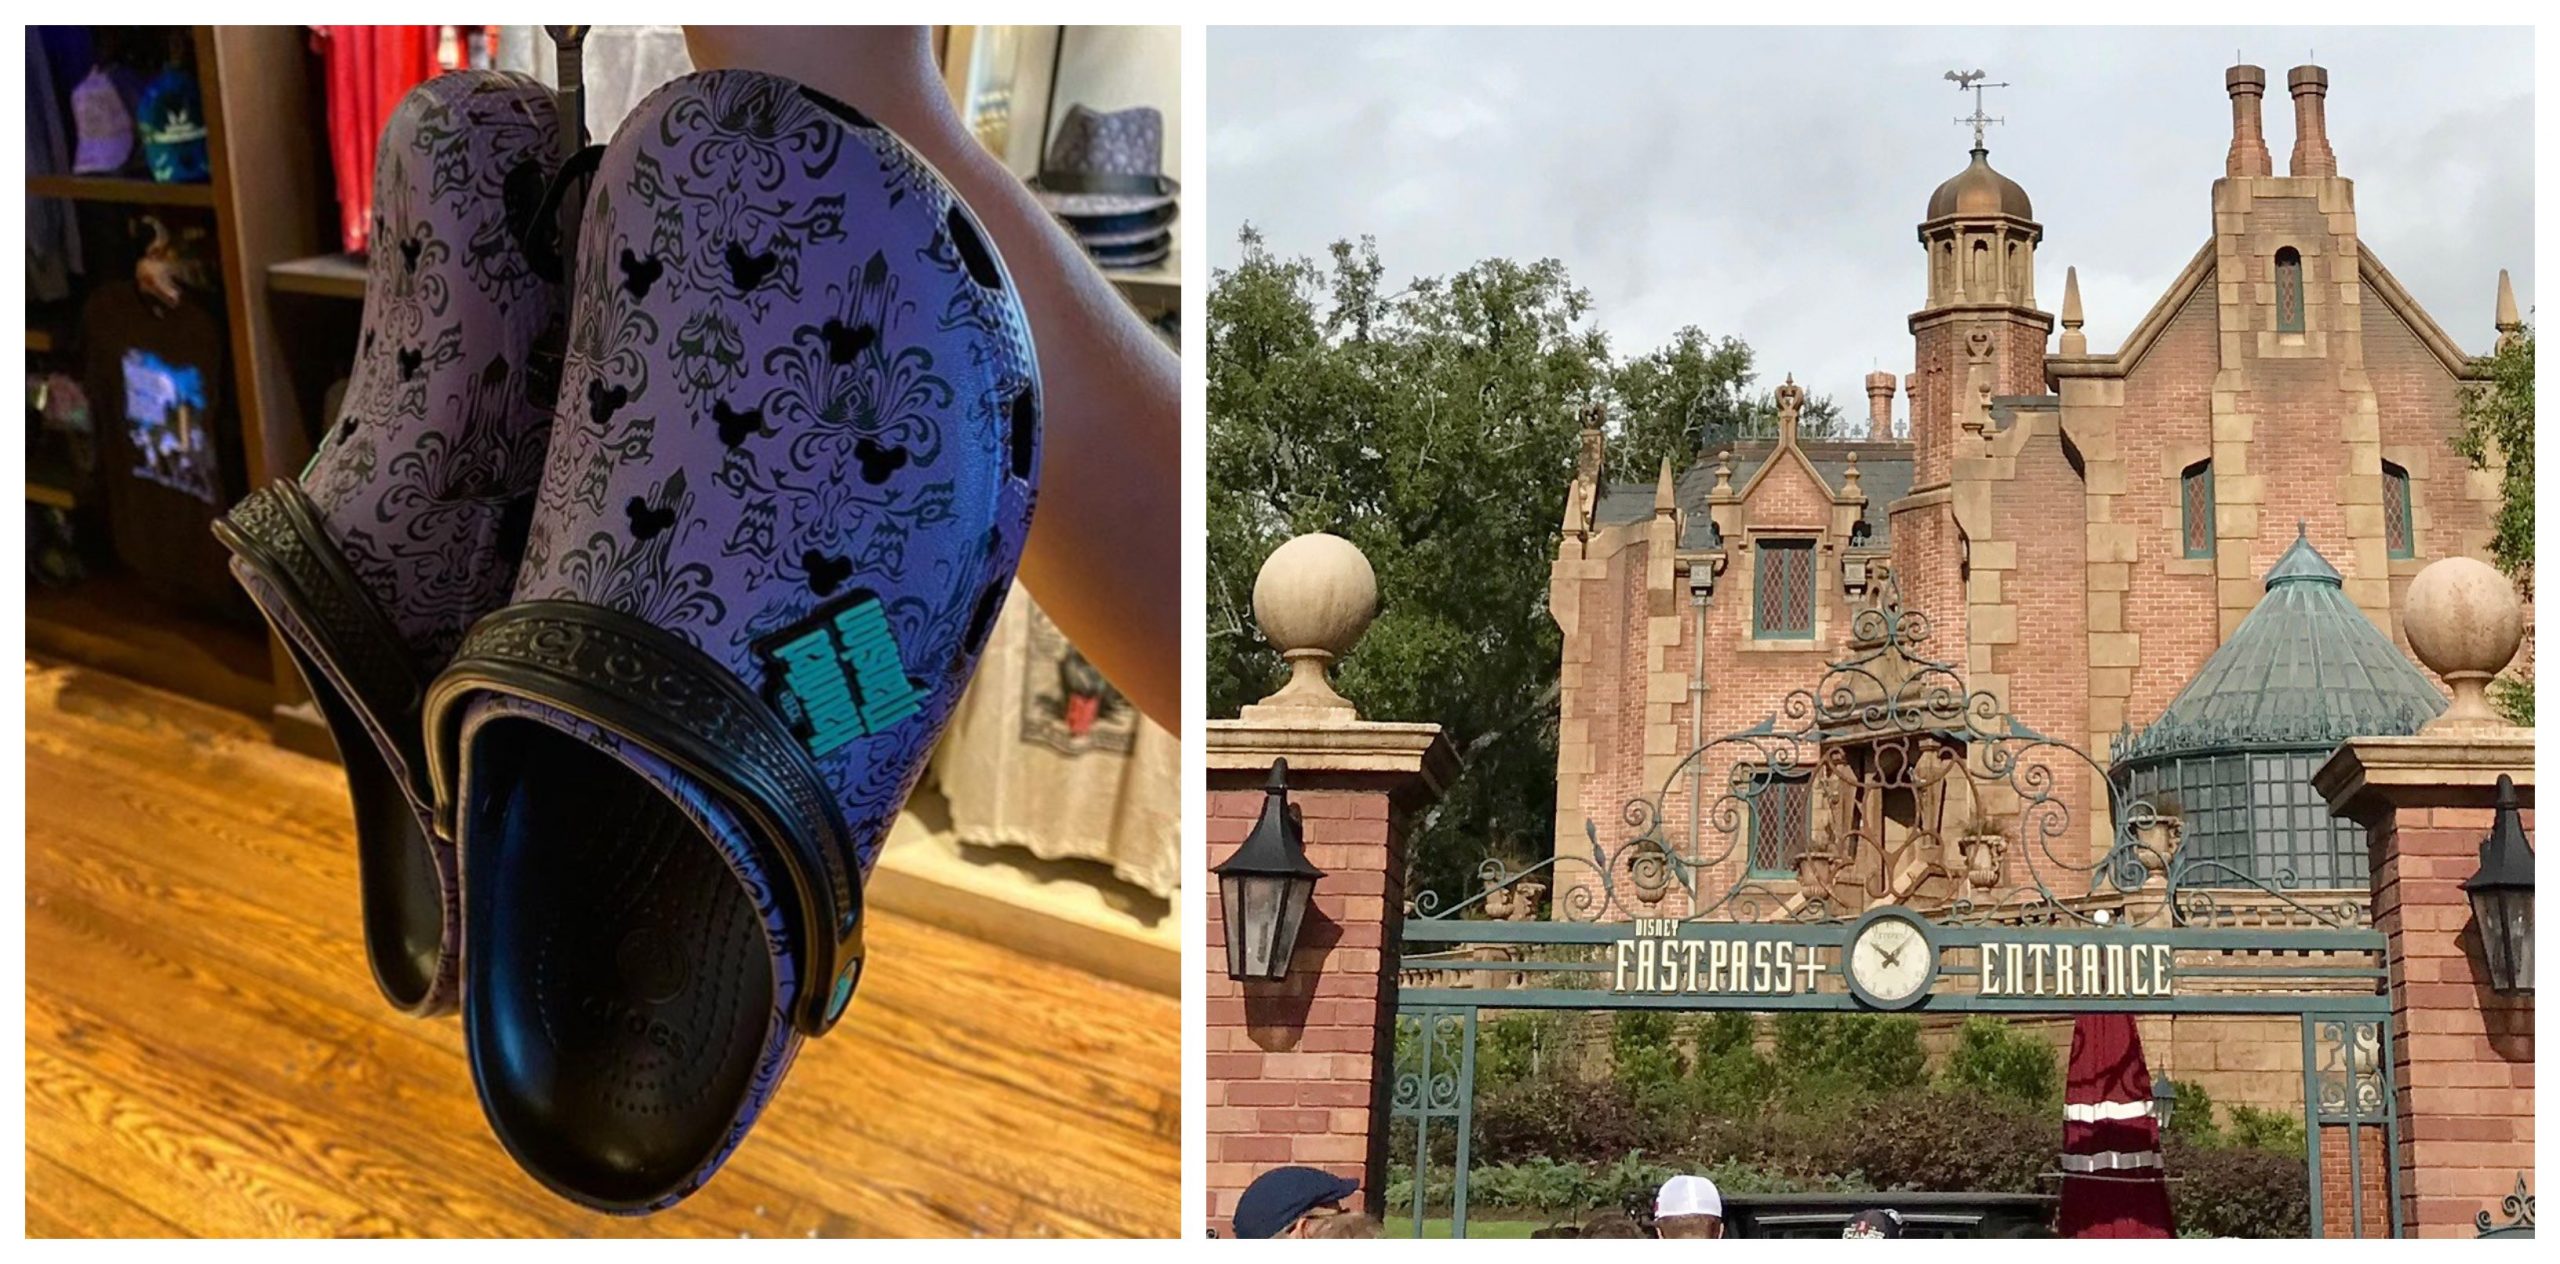 Haunted Mansion Crocs materialize in the Magic Kingdom